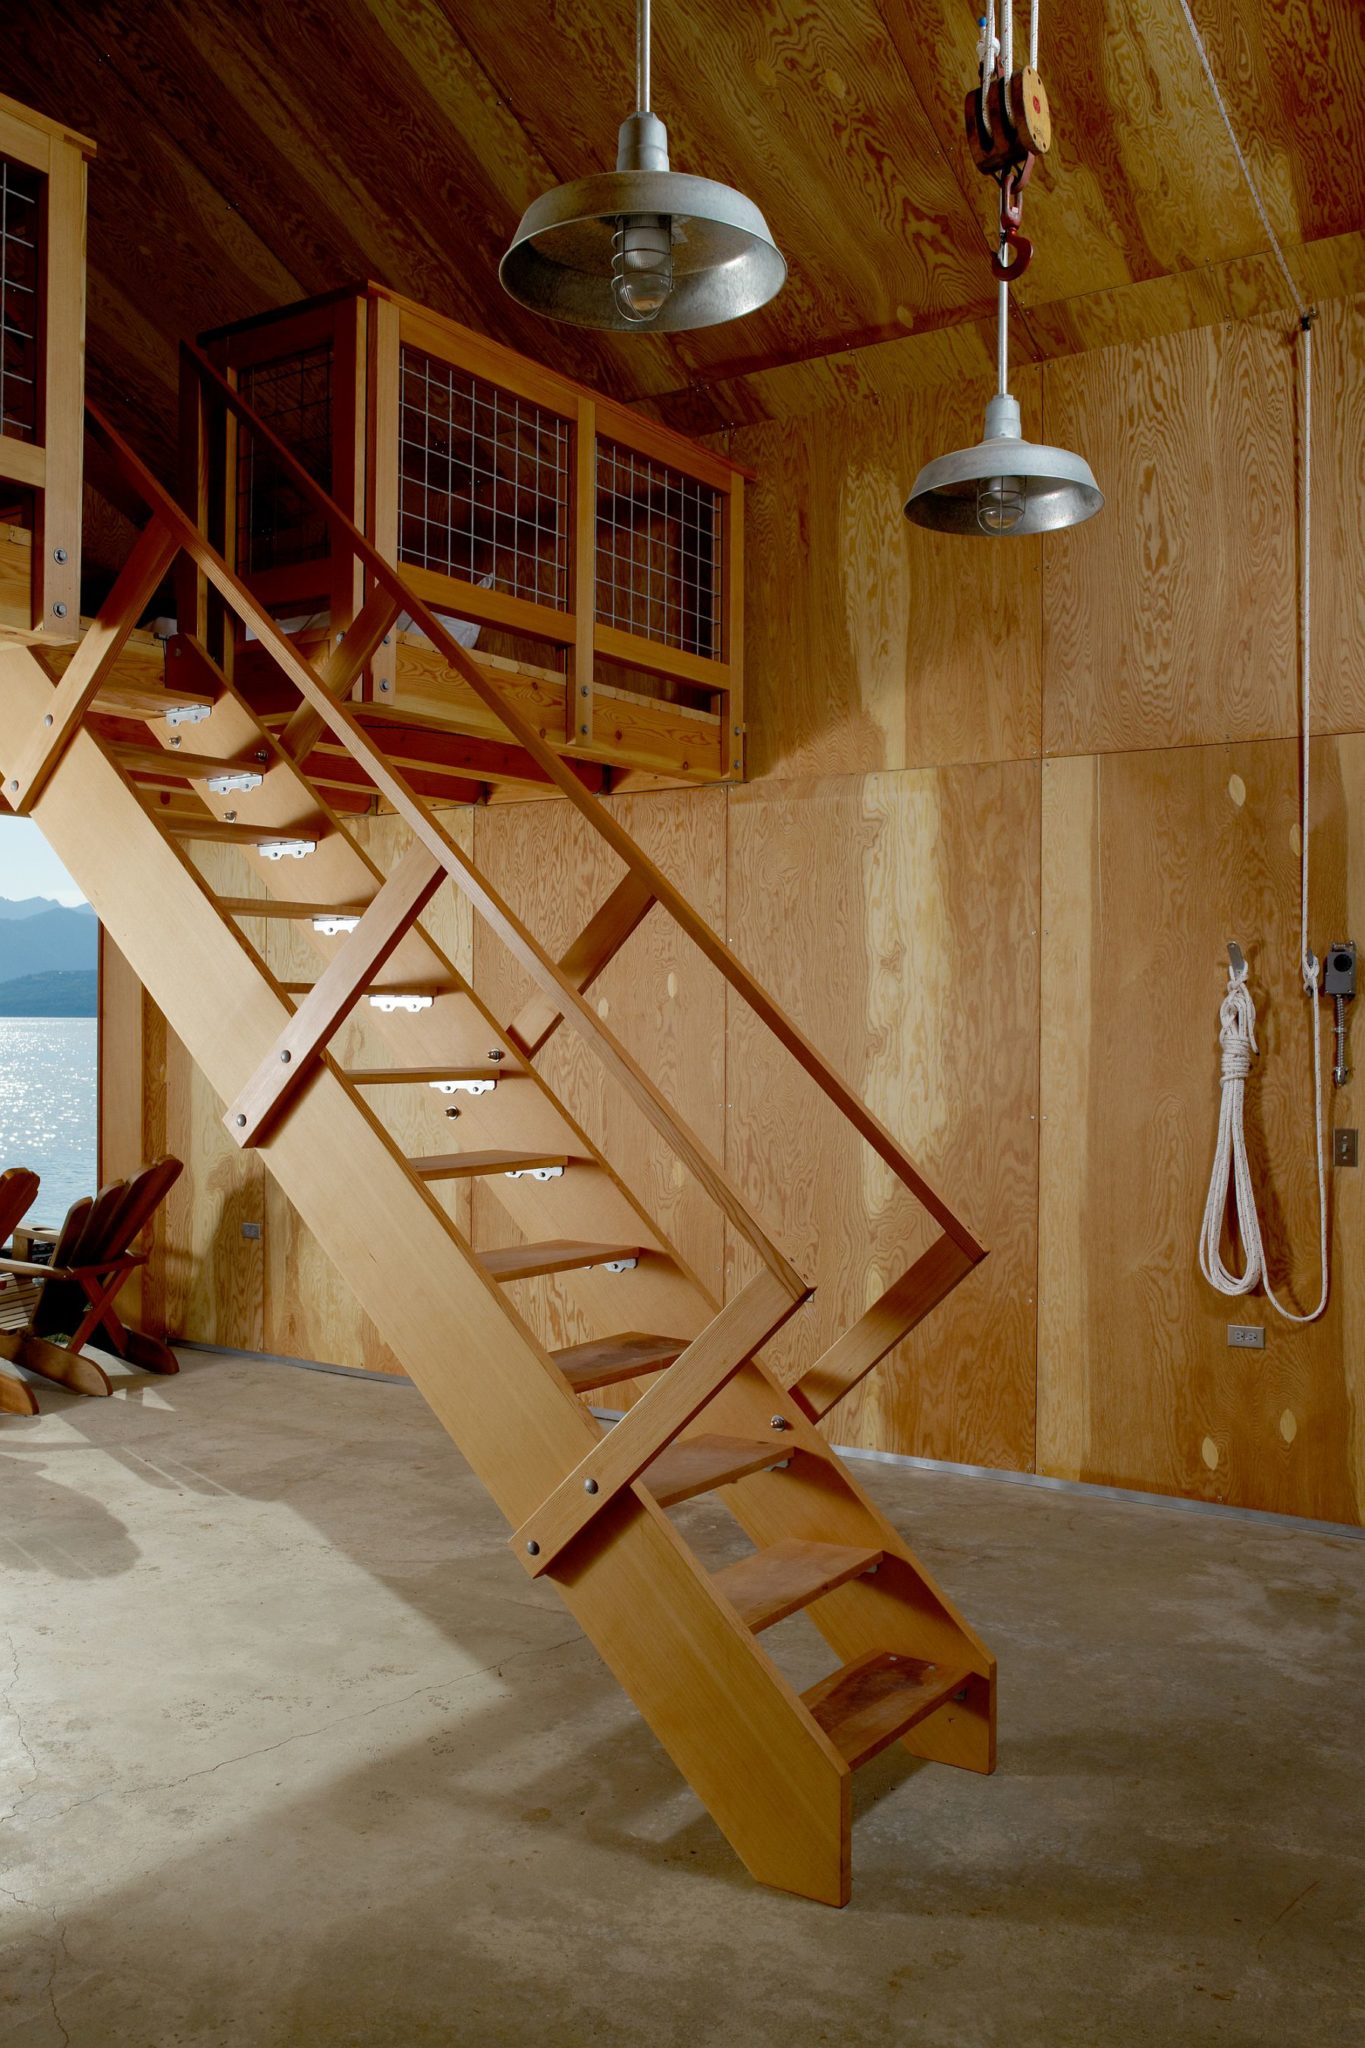 Retractable-ladder-for-the-attic-bedroom-inside-the-Boat-House